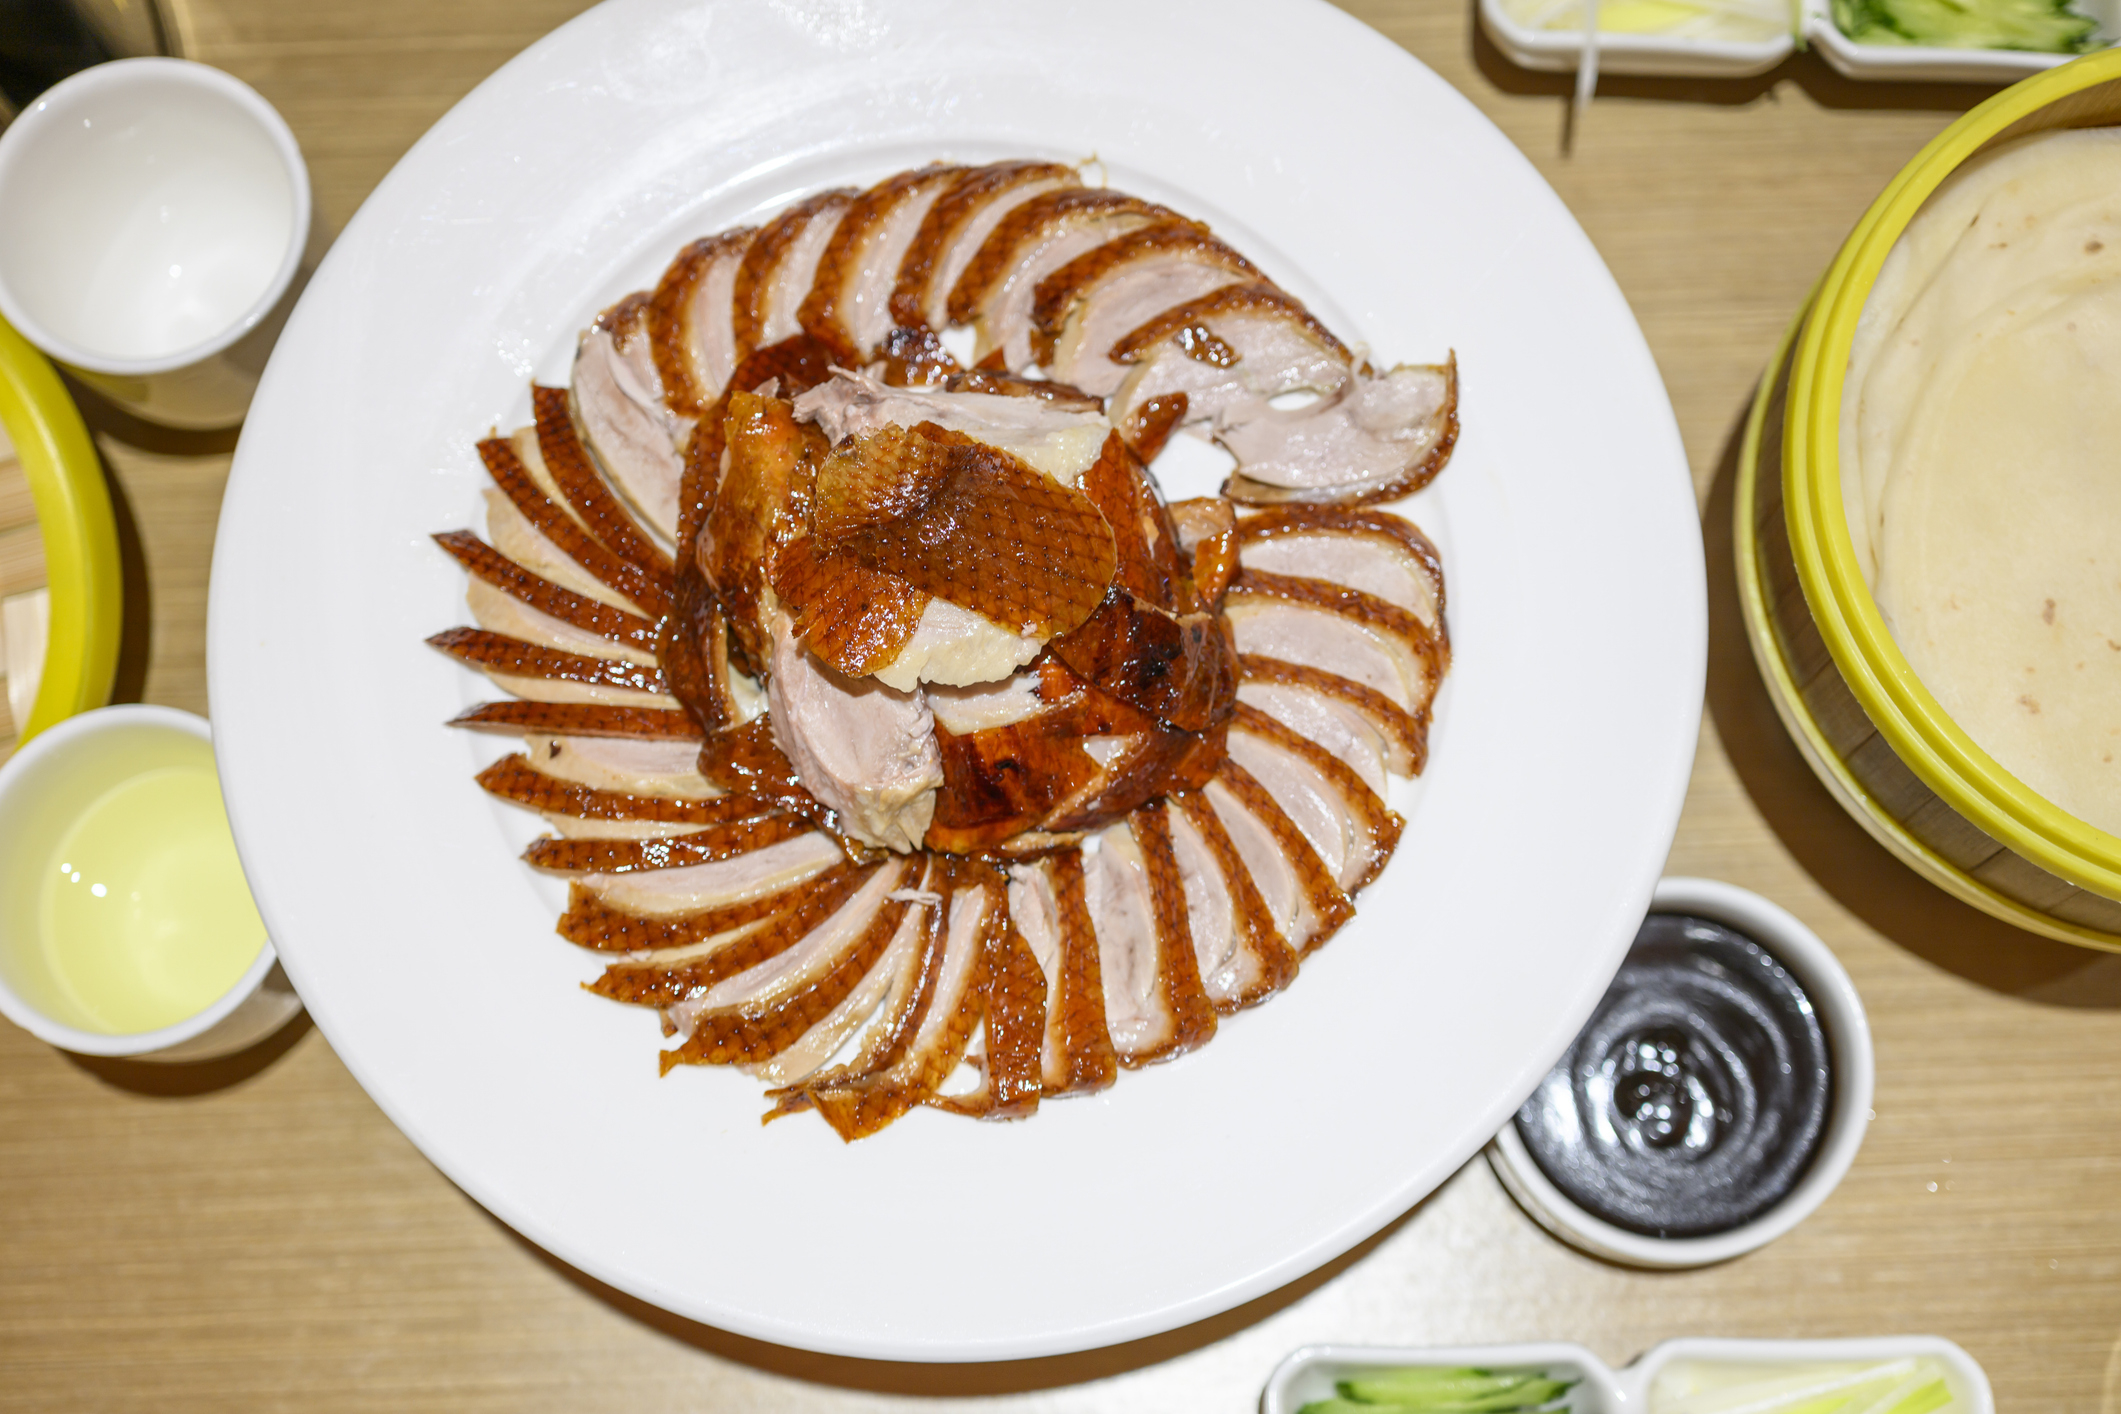 Sliced Peking duck on a plate with condiments and pancakes around it, ready for serving